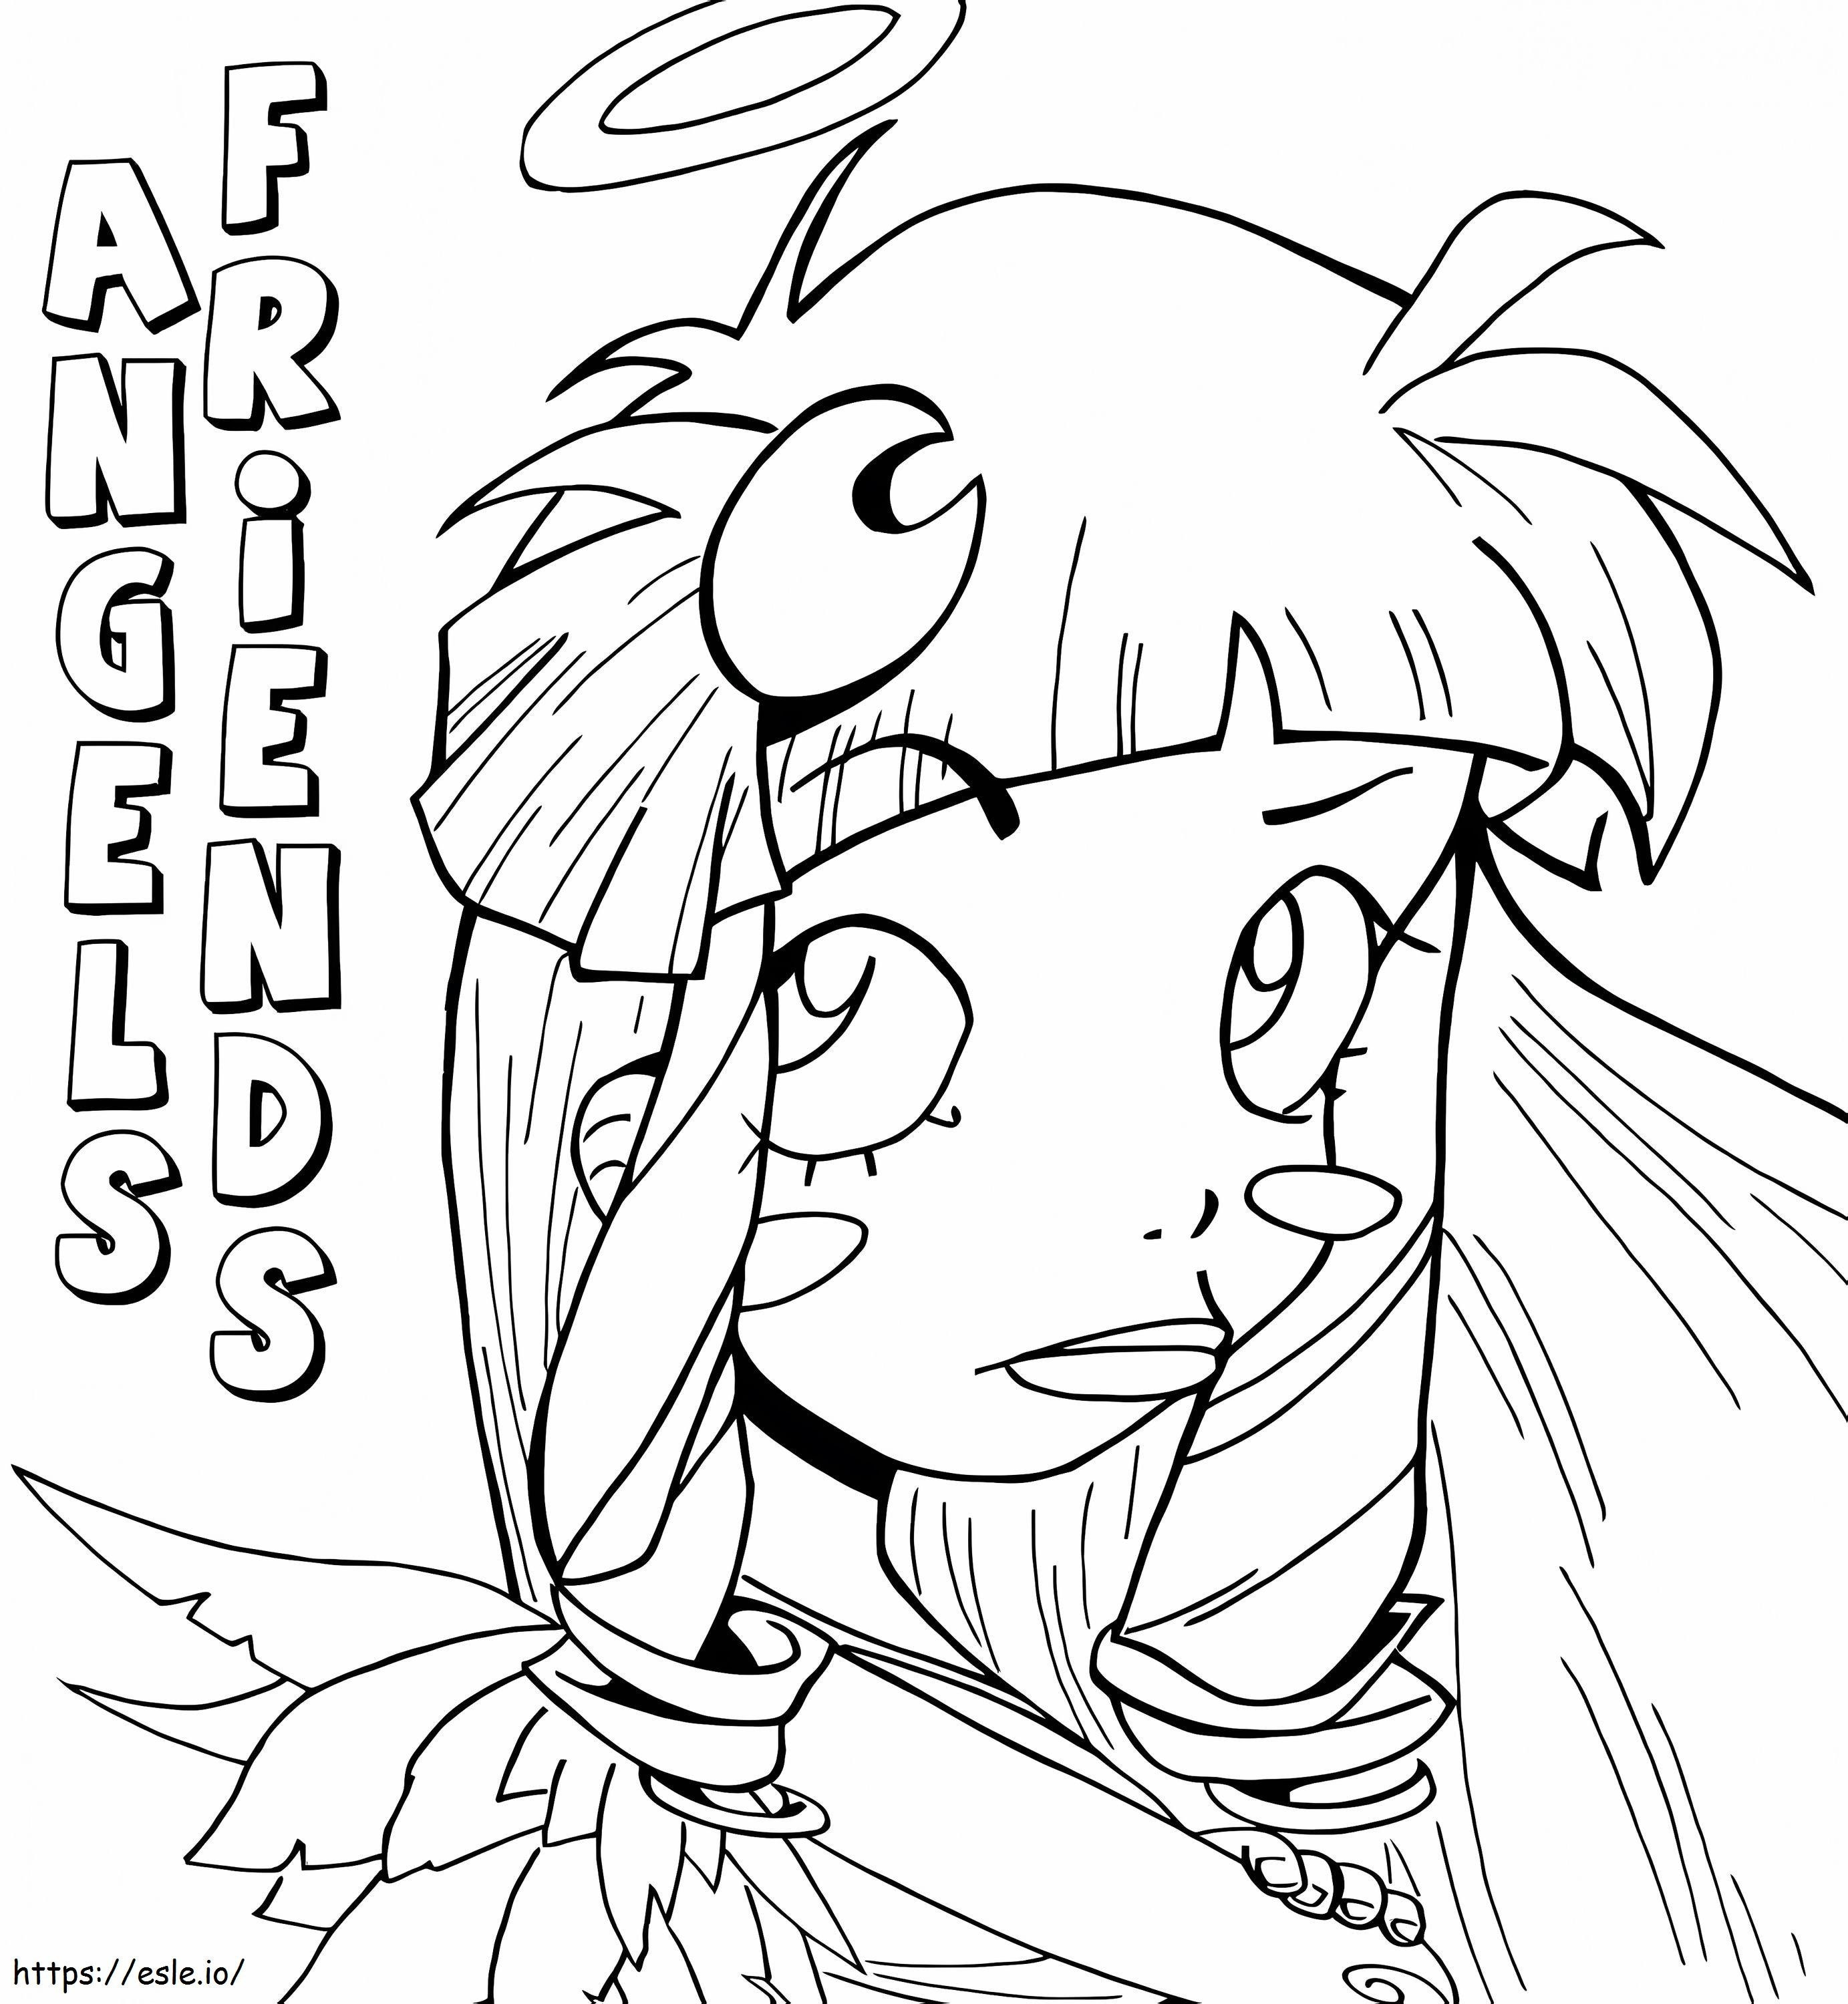 Angels Friends 8 coloring page